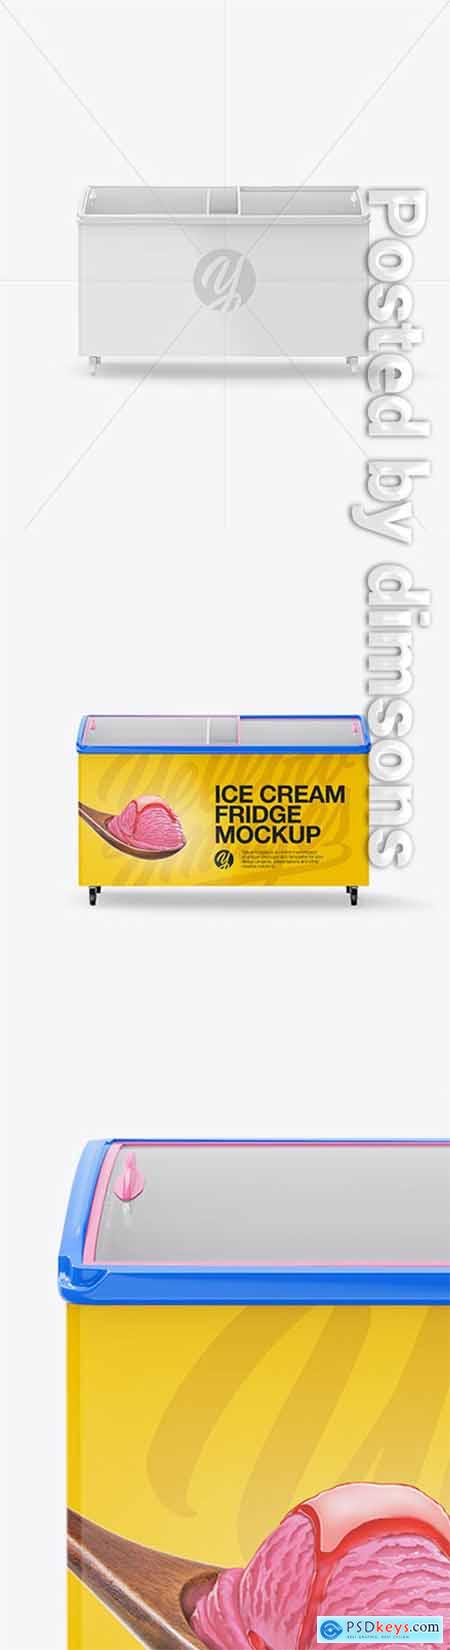 Download Product Mock-ups » page 5 » Free Download Photoshop Vector Stock image Via Torrent Zippyshare ...